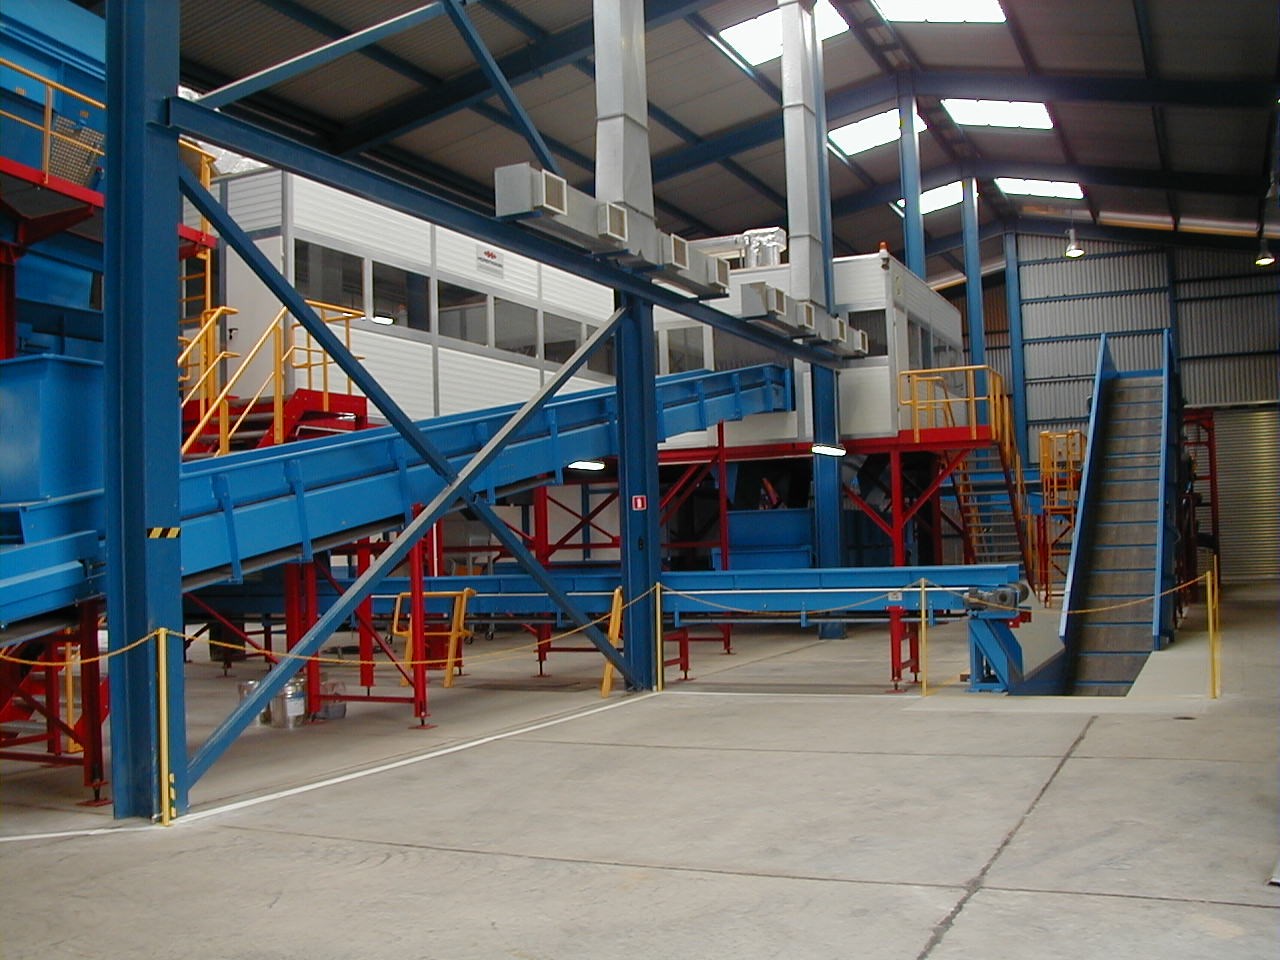 Non-ferrous metal sorting processing line project successfully signed